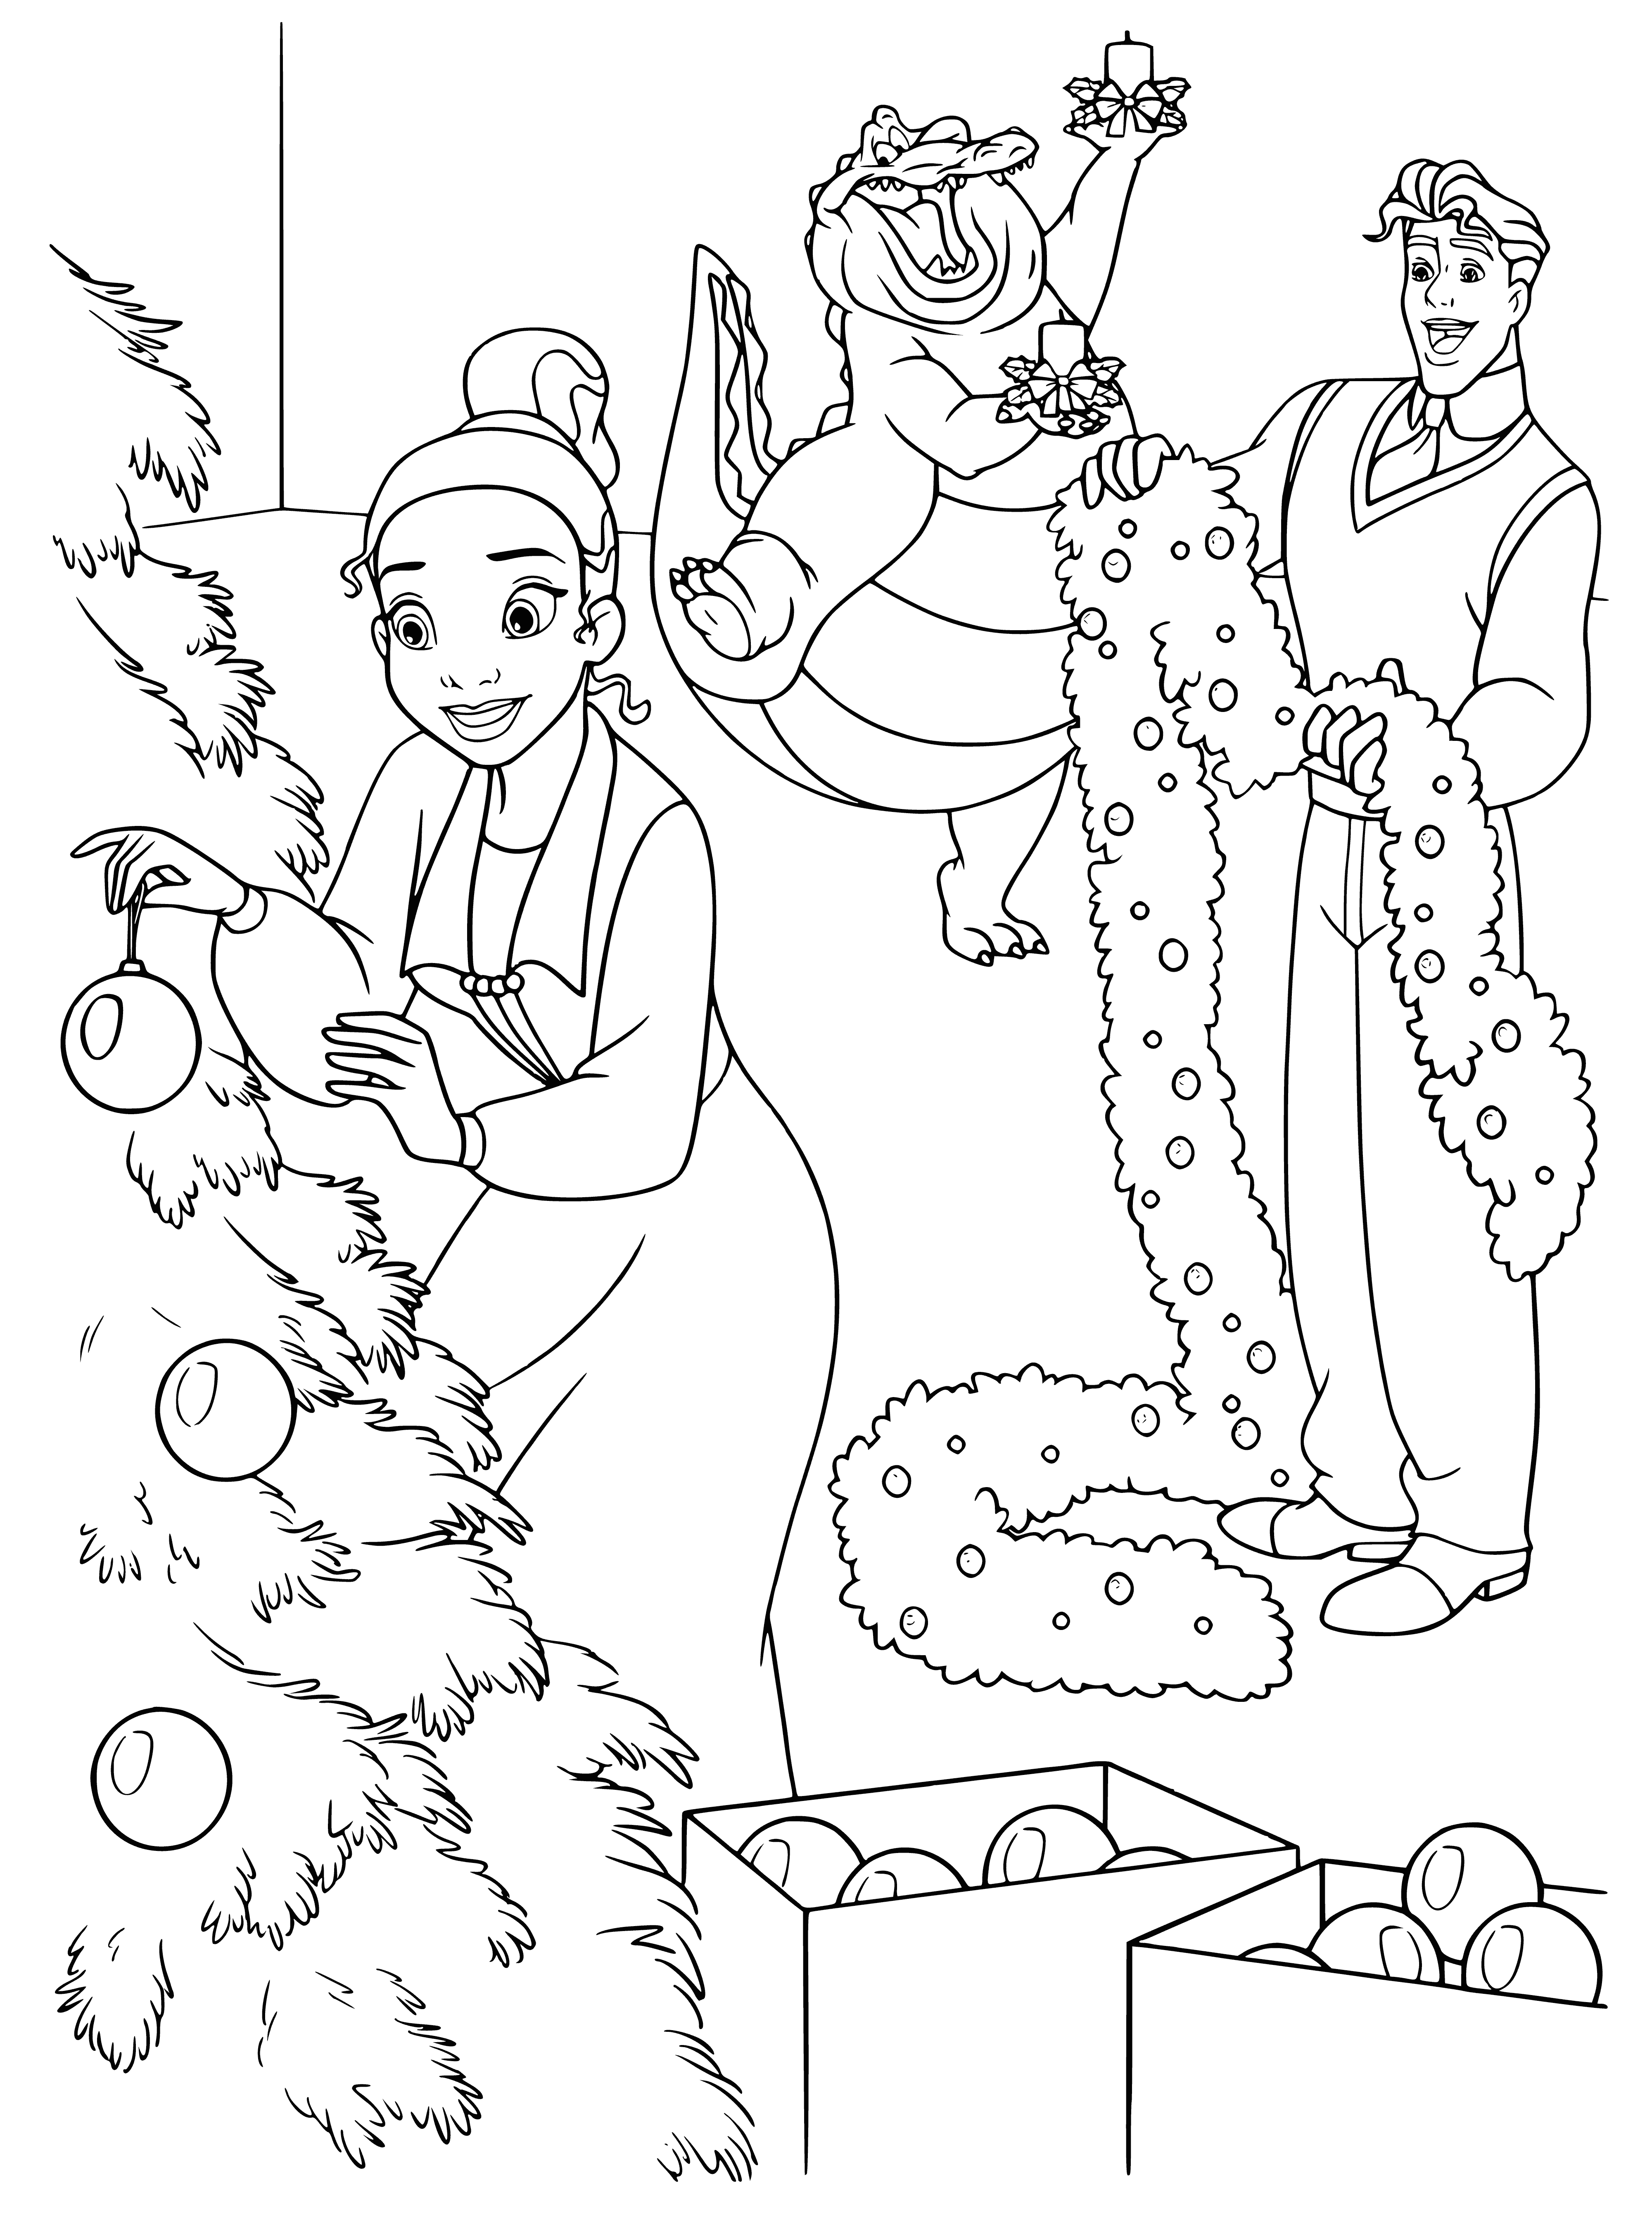 Tiana decorates the tree coloring page